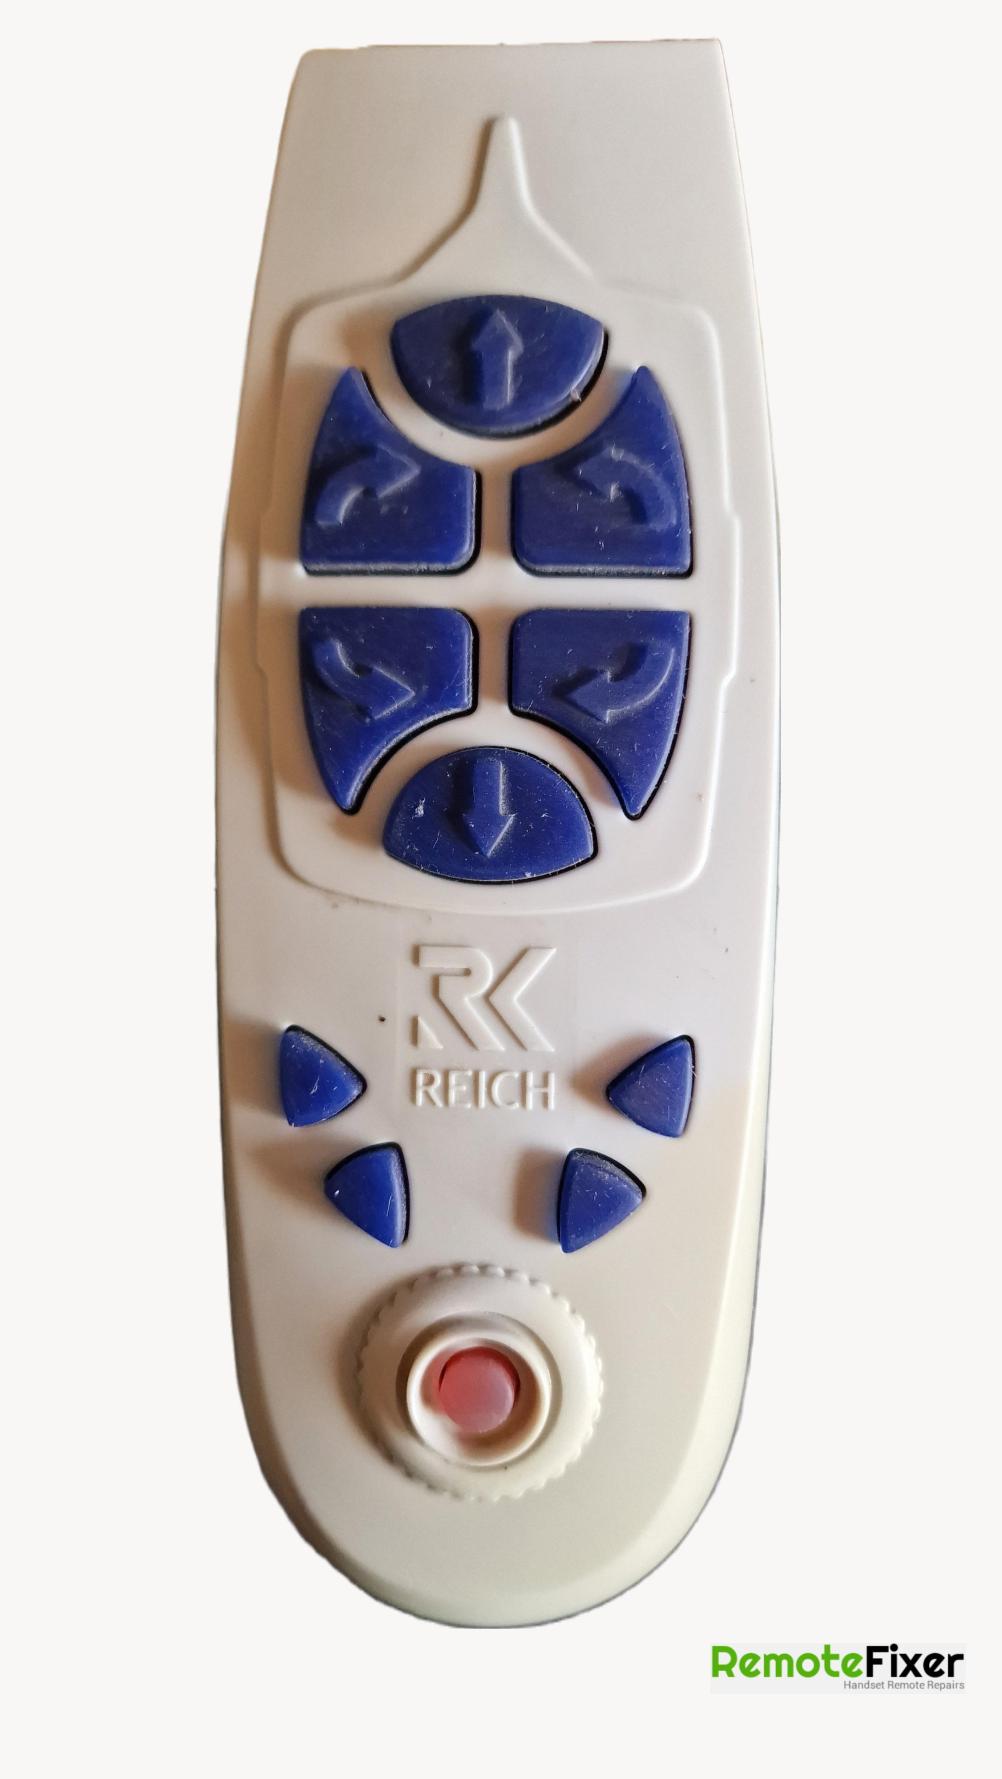 Move Controll III 527-0510 Remote Control - Front Image